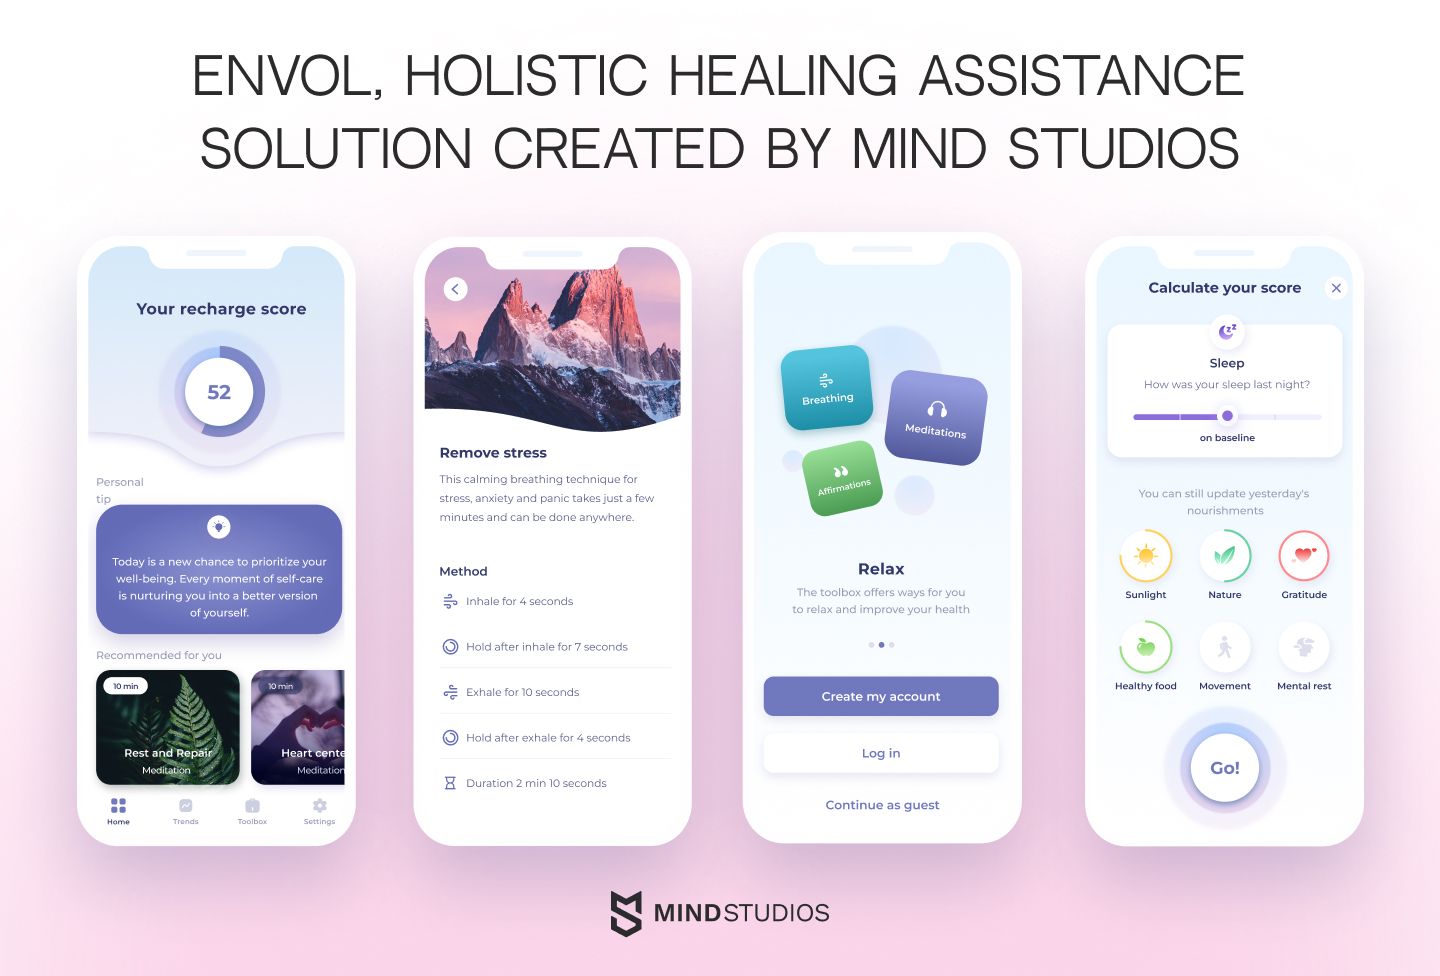 Envol, holistic healing assistance solution created by Mind Studios